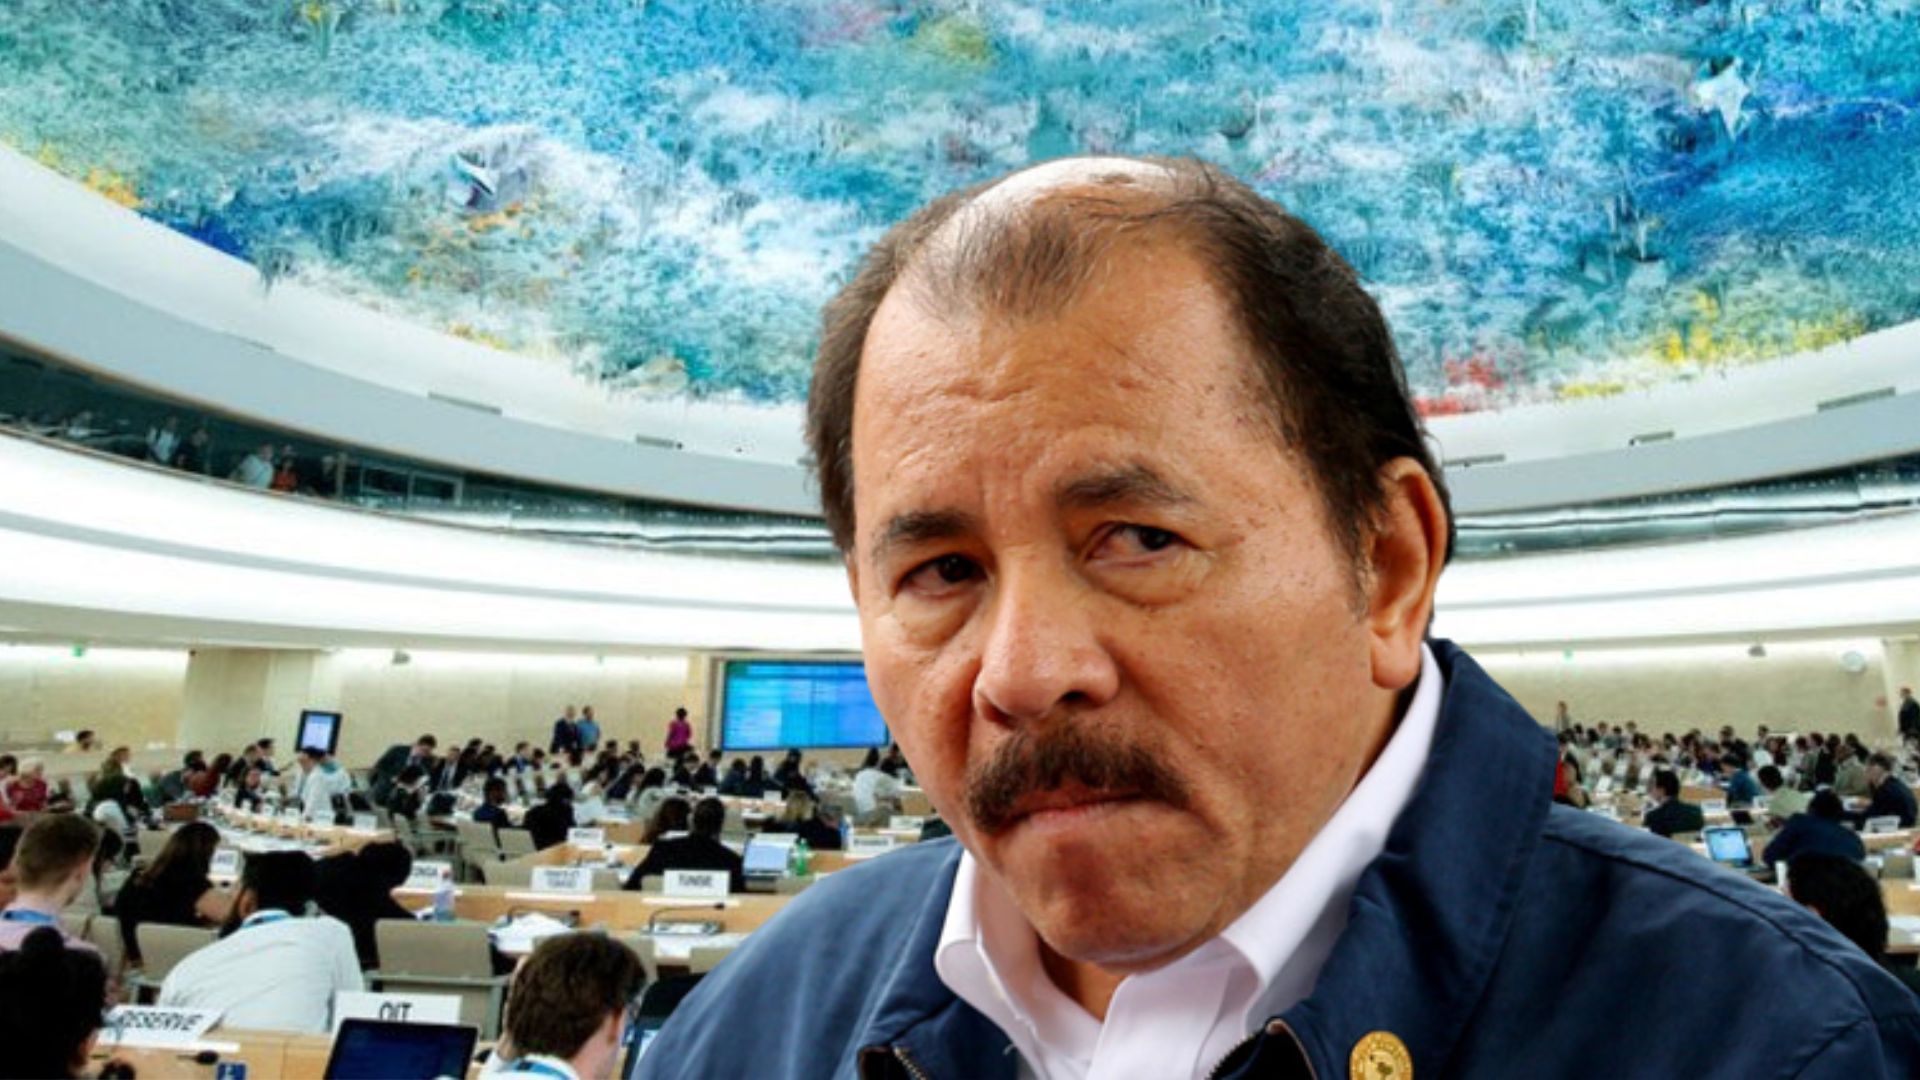 Defenders ask the UN to renew the resolution on the crisis in Nicaragua